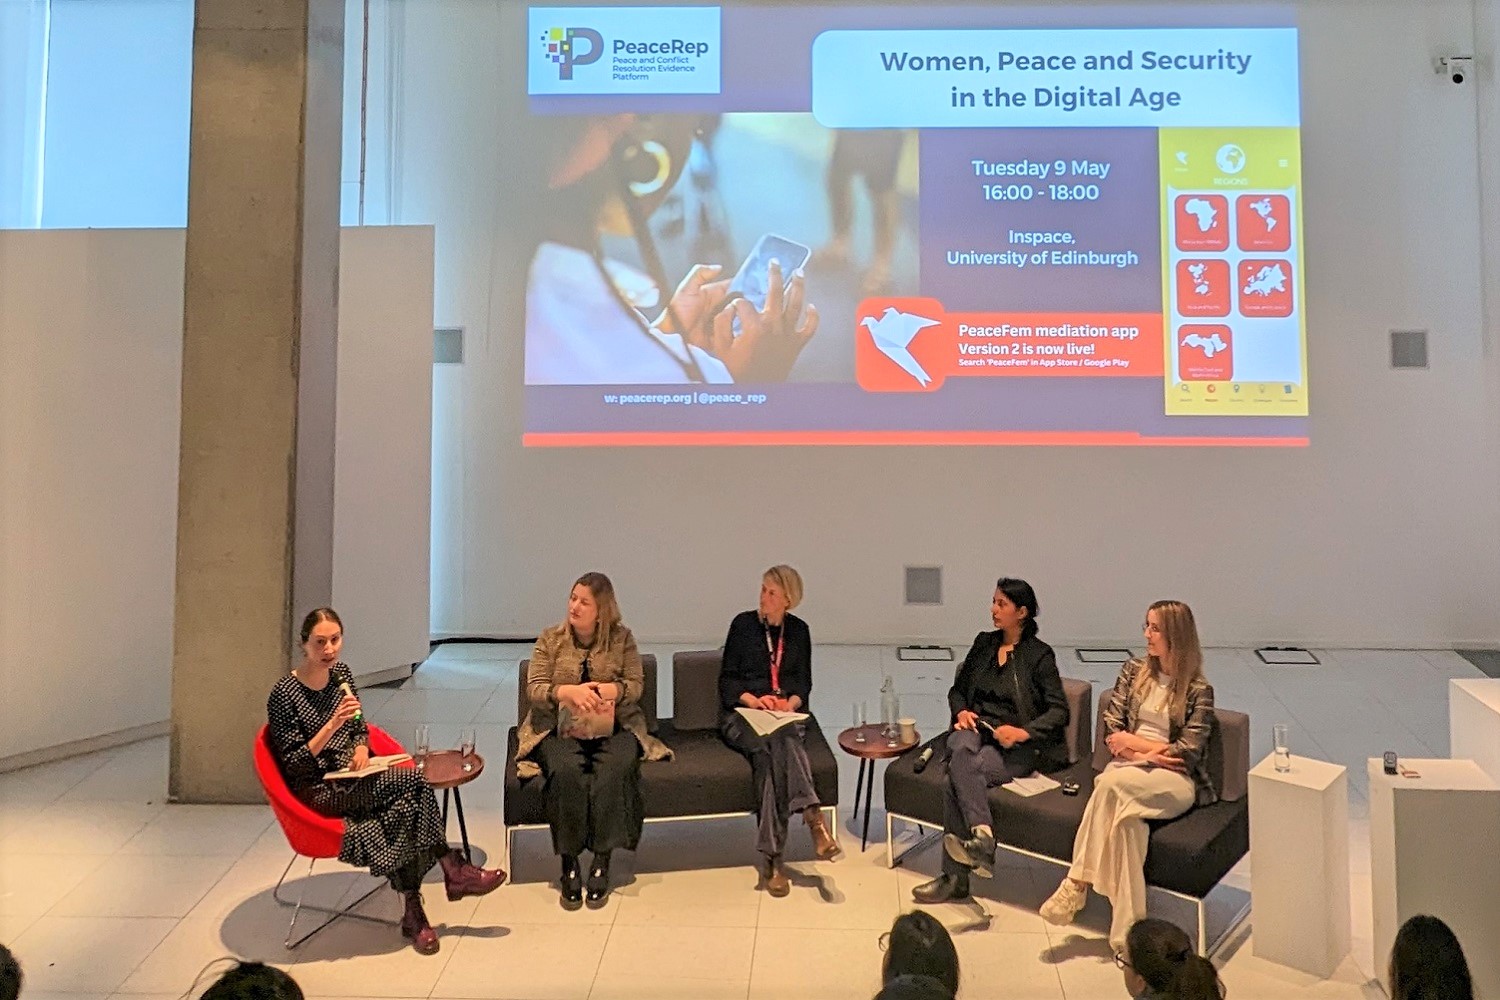 Panelists at the "Women, Peace and Security in the Digital Age" event on 9 May 2023, at Inspace, University of Edinburgh